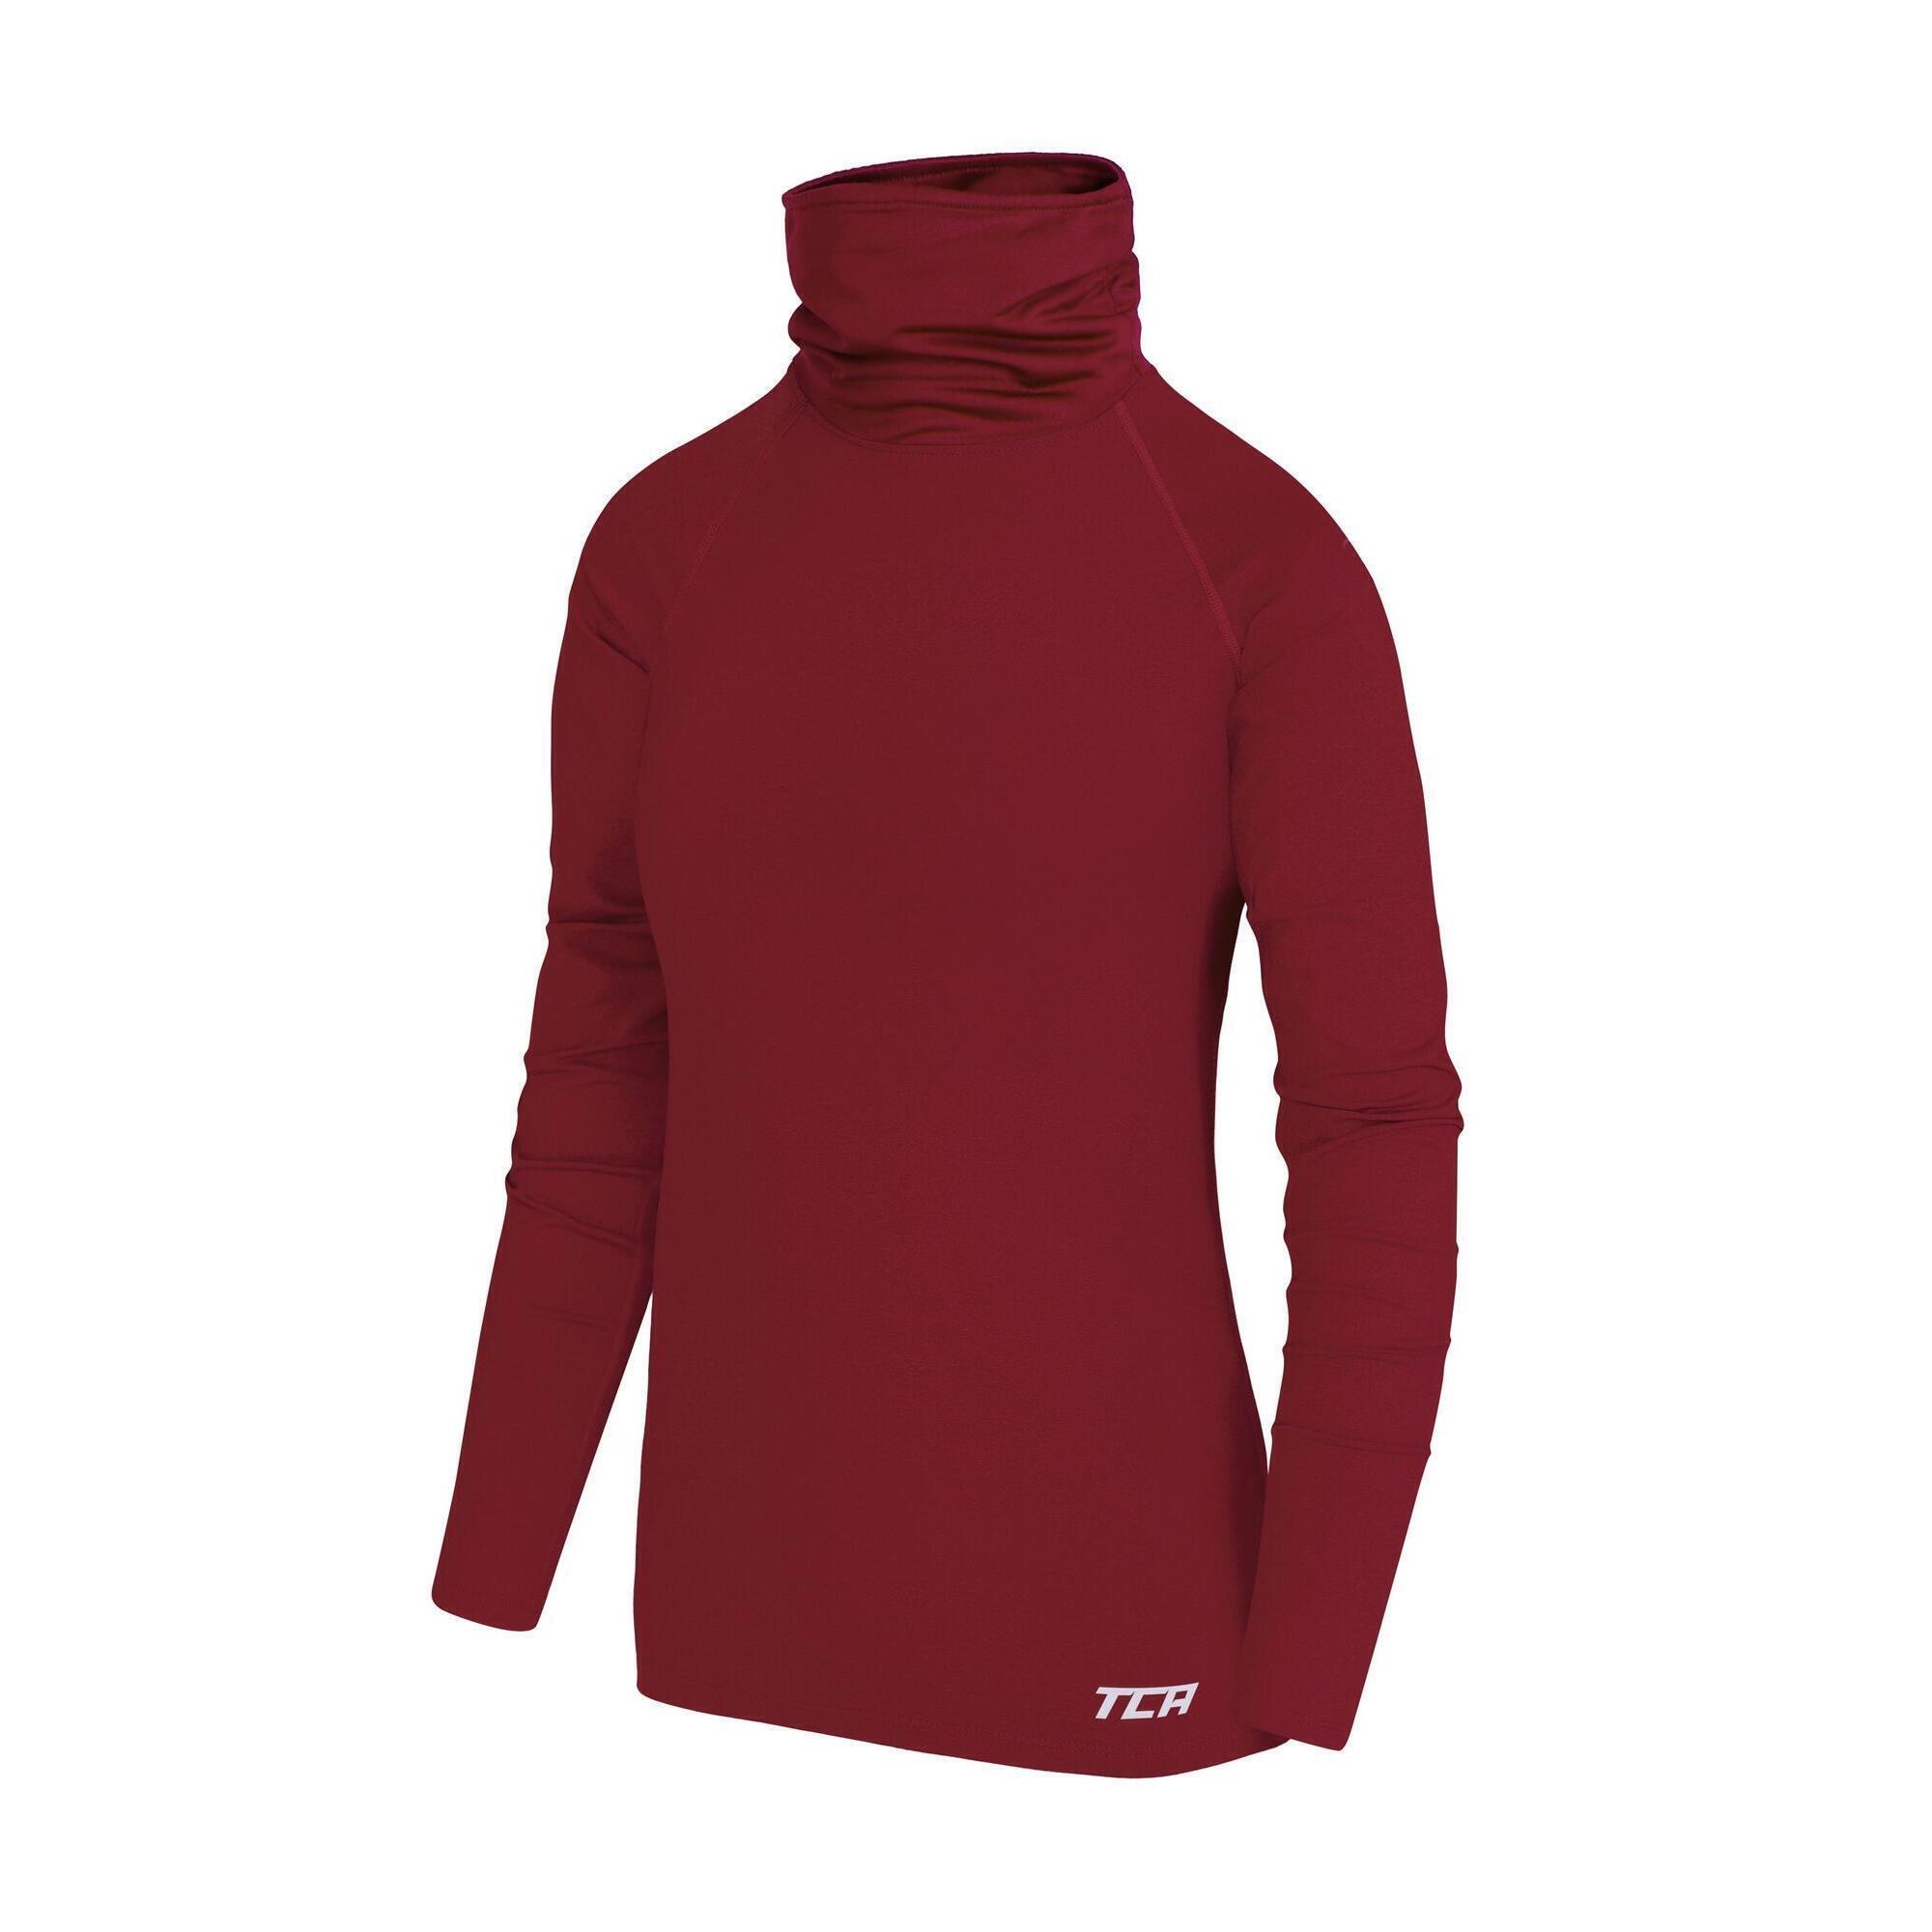 Girls' Thermal Funnel Neck Top - Cabernet 2/5